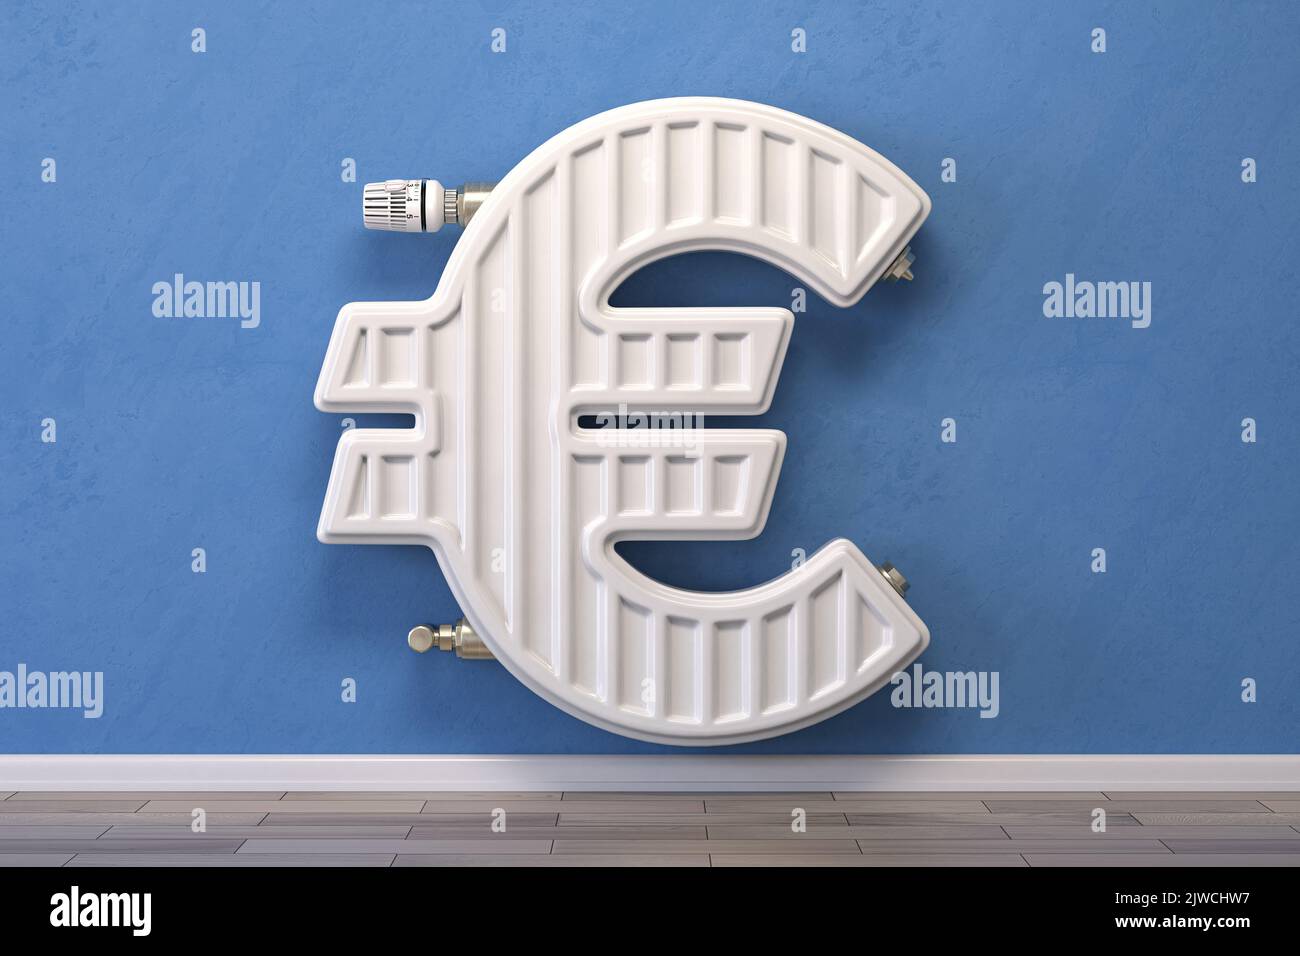 Heating radiator in form of euro sign.  Energy crisis, energy efficiency and rising heating costs in Europe concept. 3d illustration Stock Photo